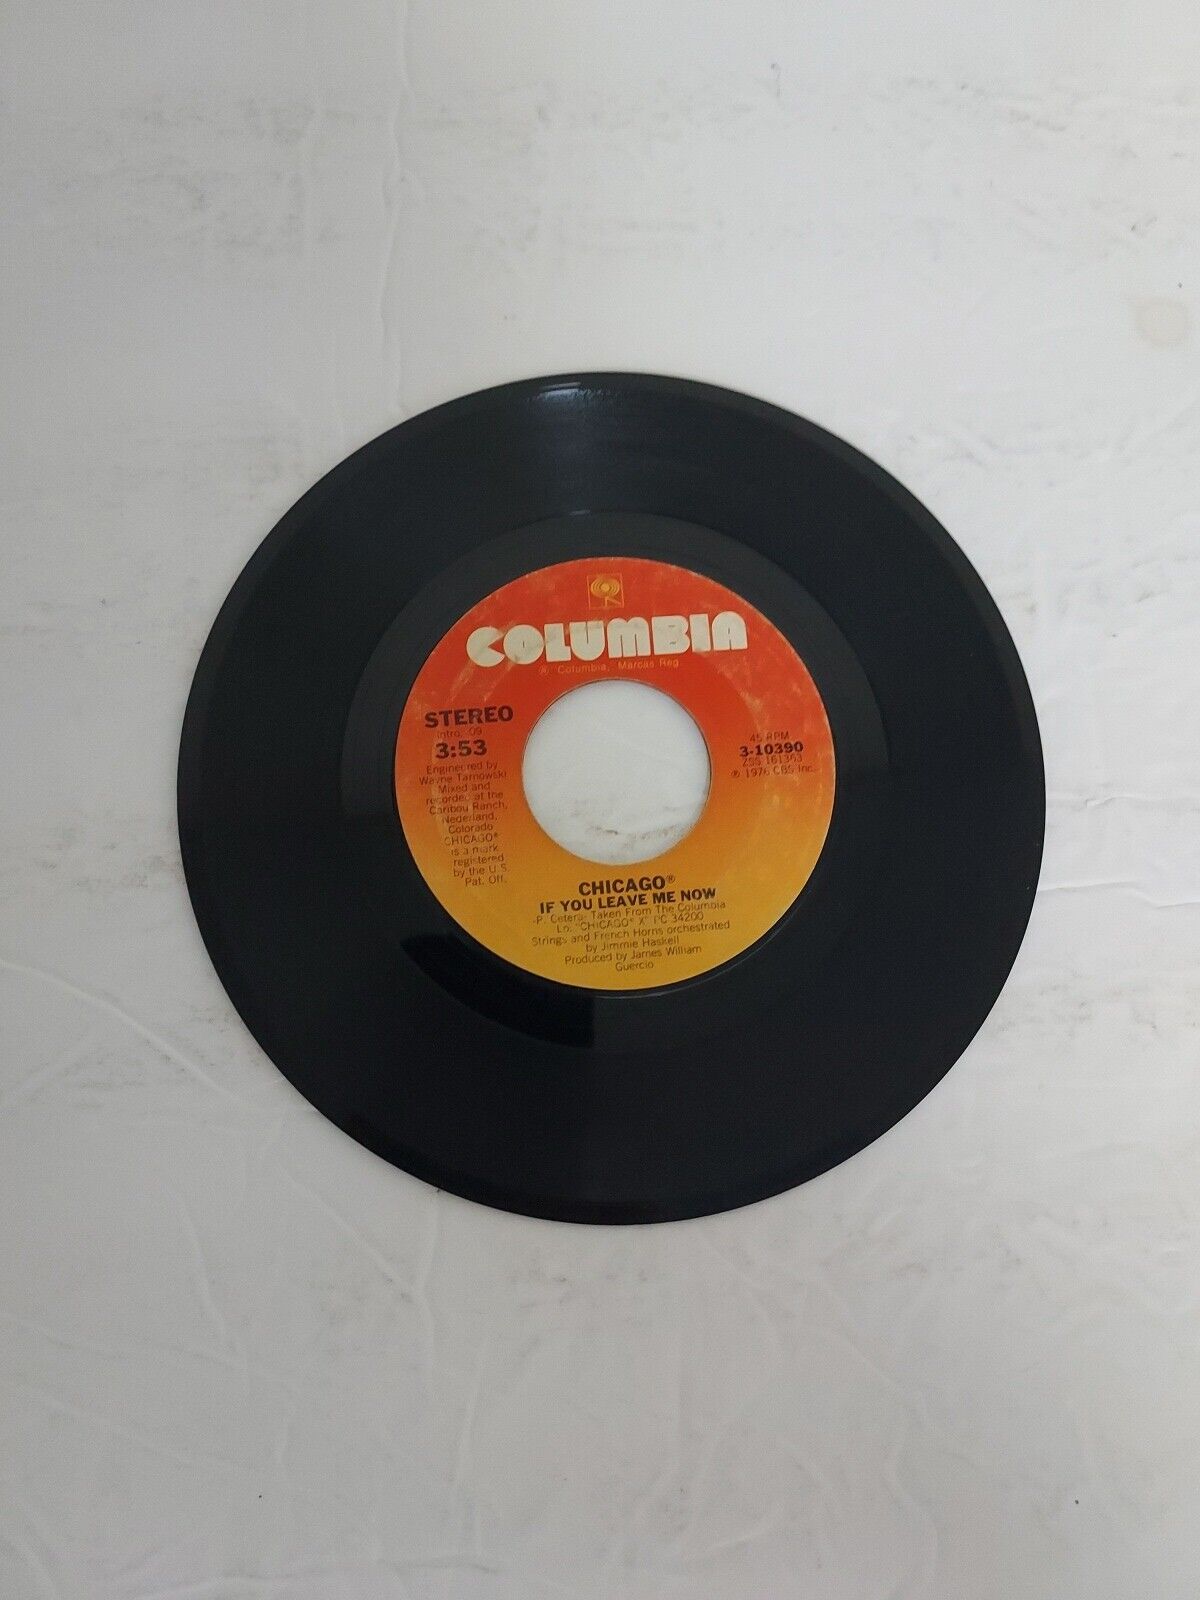 45 RPM Vinyl Record Chicago If You Leave Me Now VG